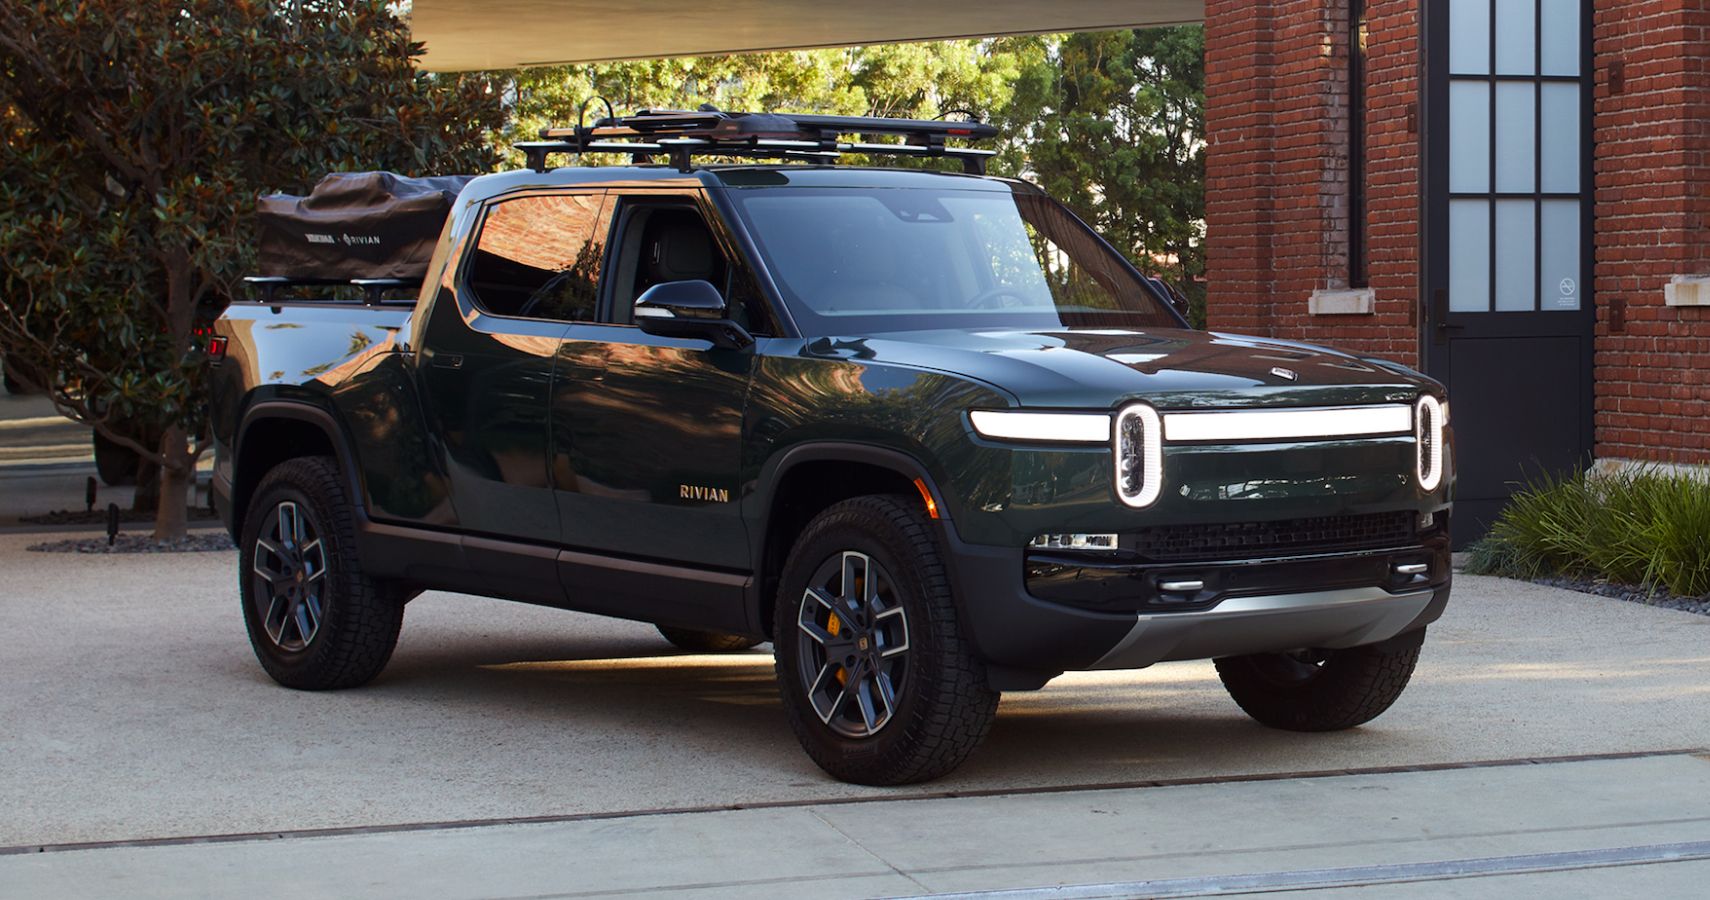 Green 2022 Rivian R1T parked outdoors